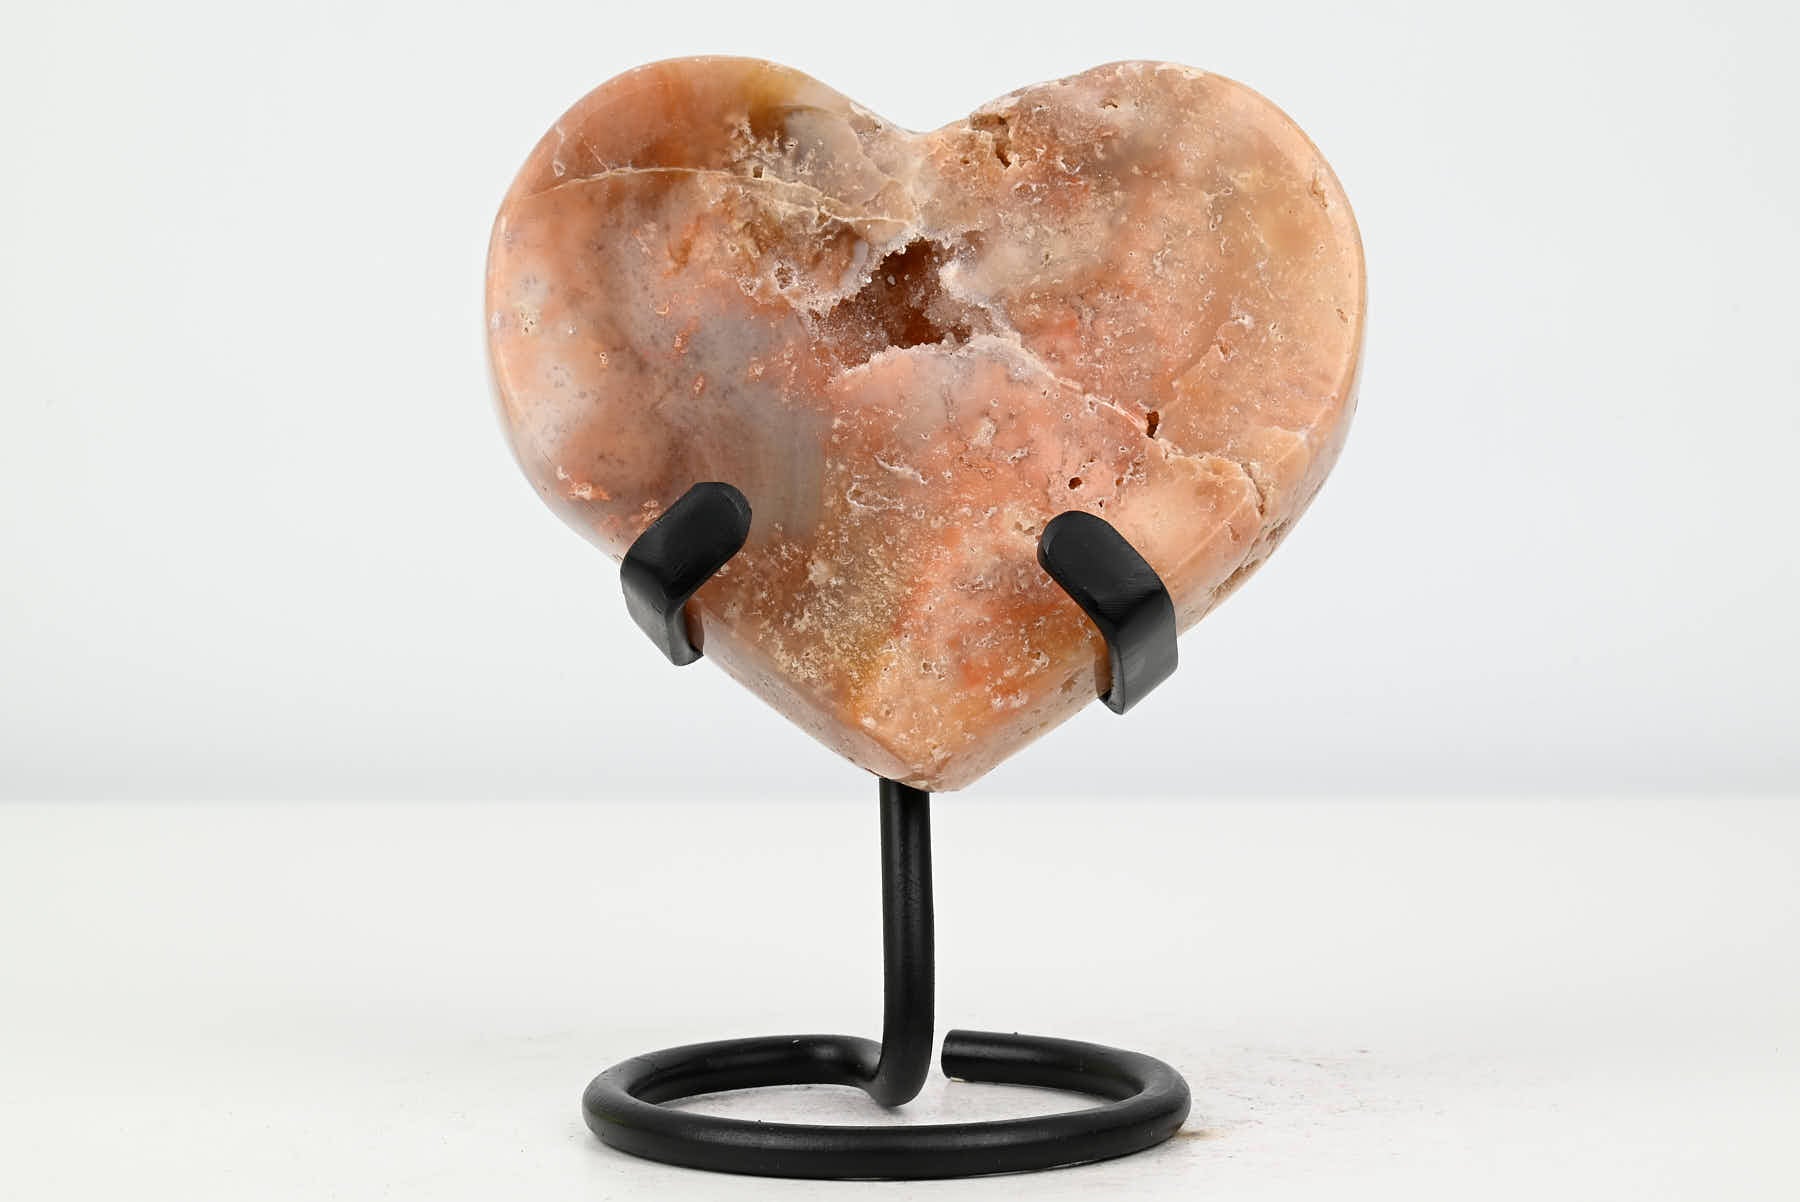 Extra Quality Pink Amethyst Heart - 0.45kg, 13cm high - #HTPINK-34003